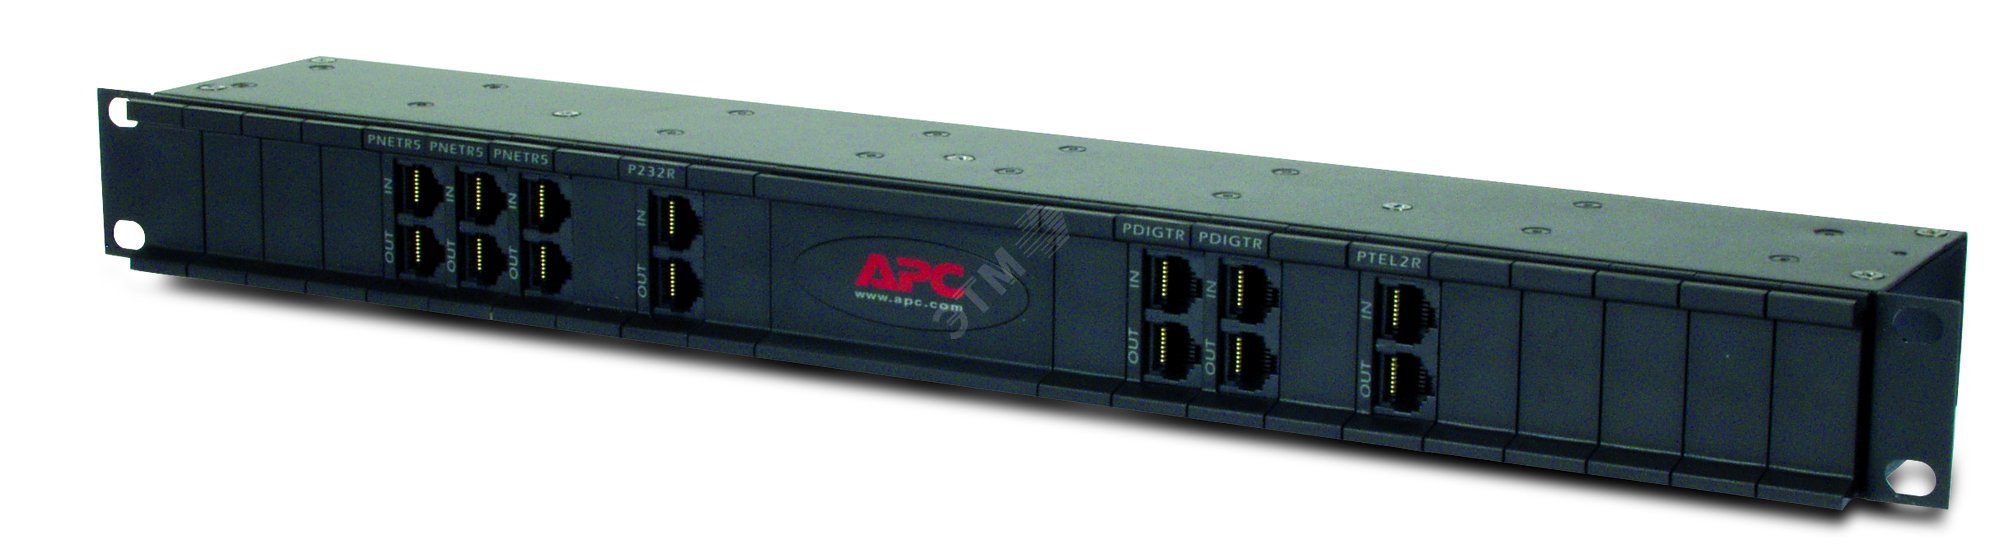 Шасси 19' CHASSIS, 1U, 24 CHANNELS, FOR REPLACEABLE DATA LINE SURGE PROTECTION' PRM24 APC